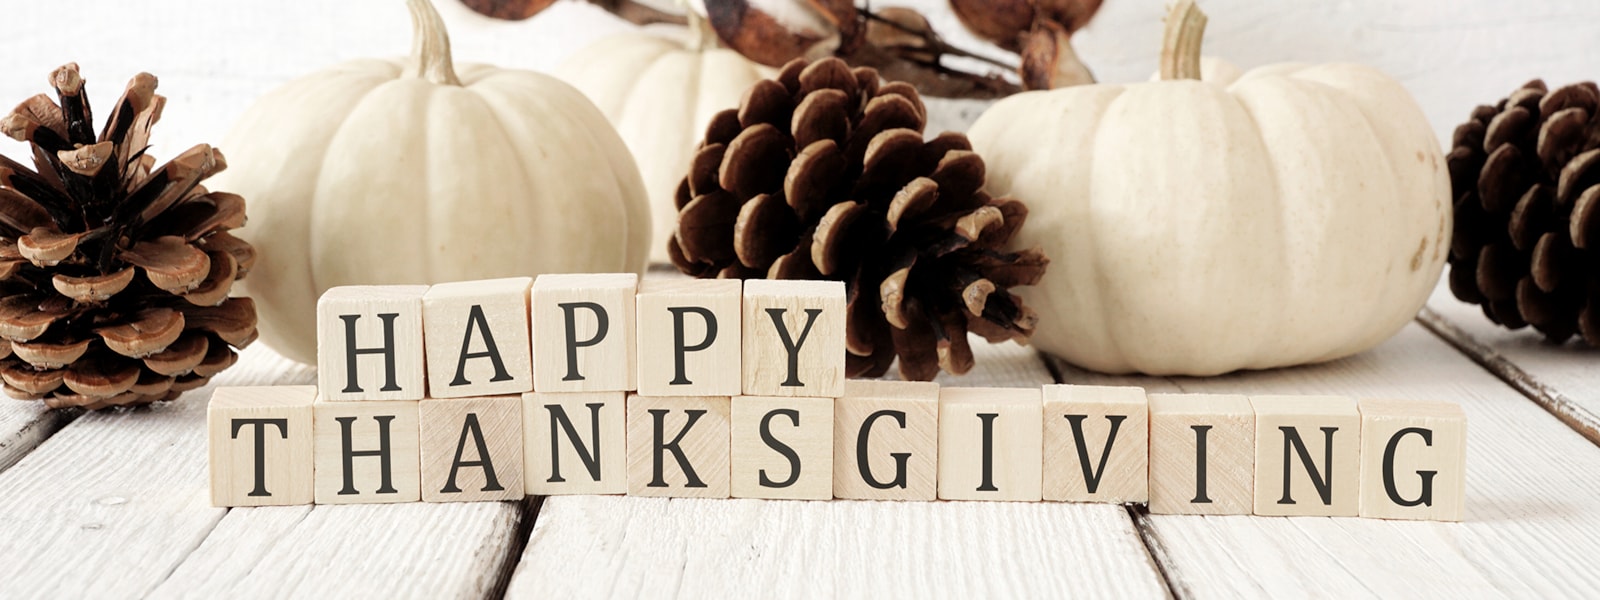 Happy Thanksgiving  message with pumpkins and pinecones